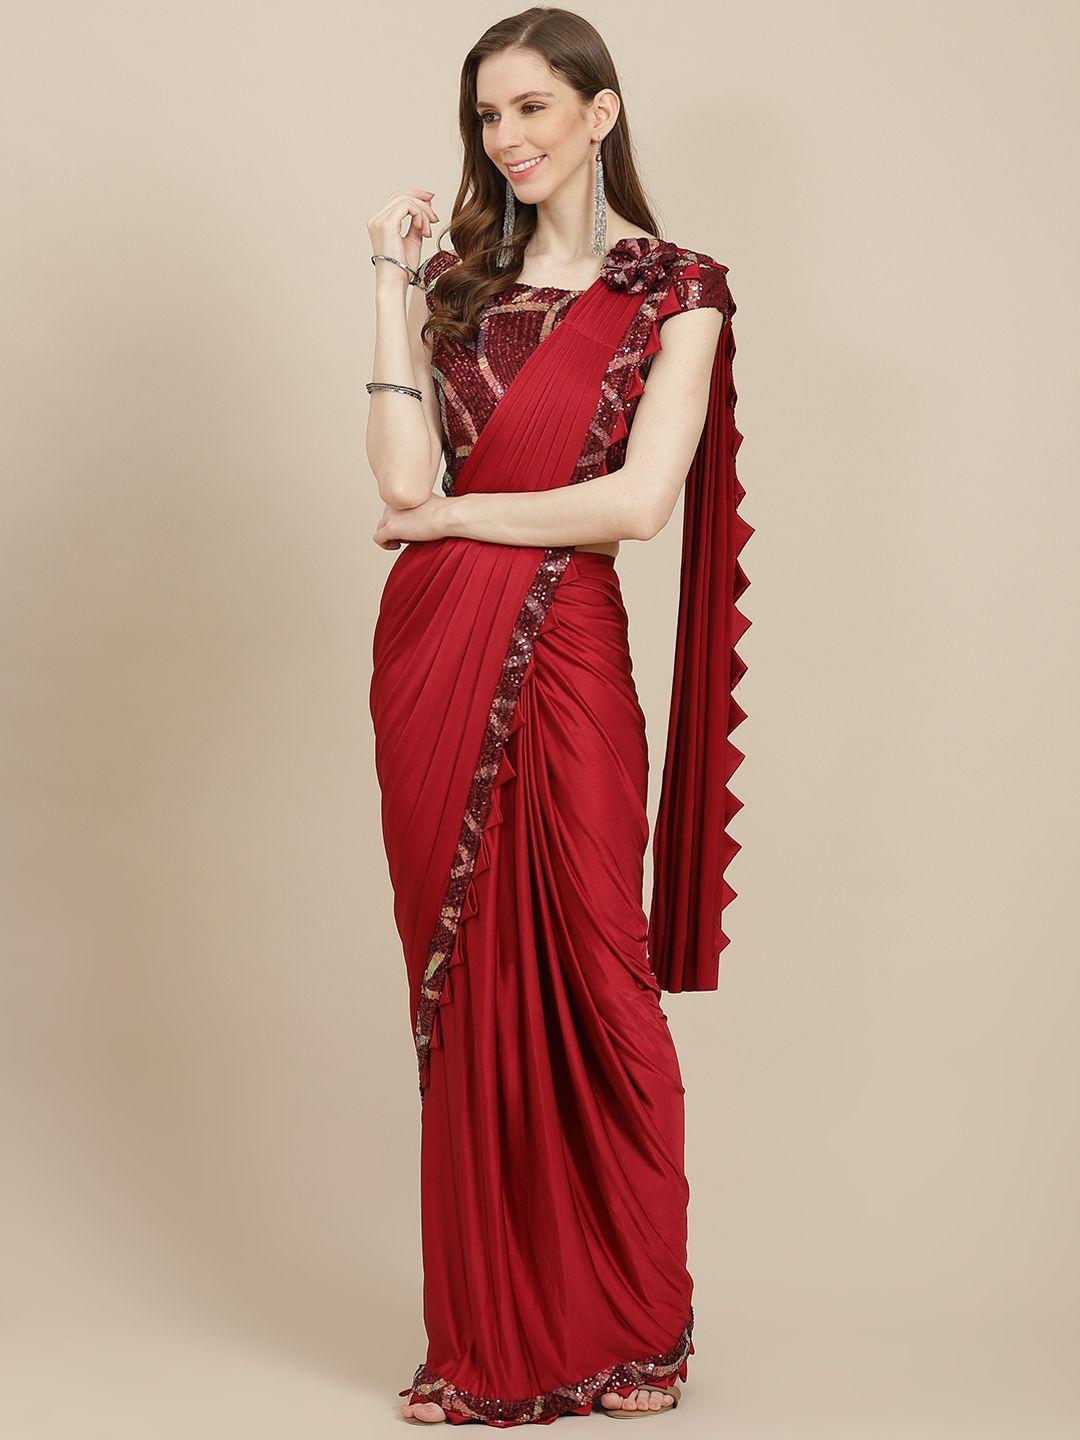 grancy maroon solid ready to wear saree with stitched blouse